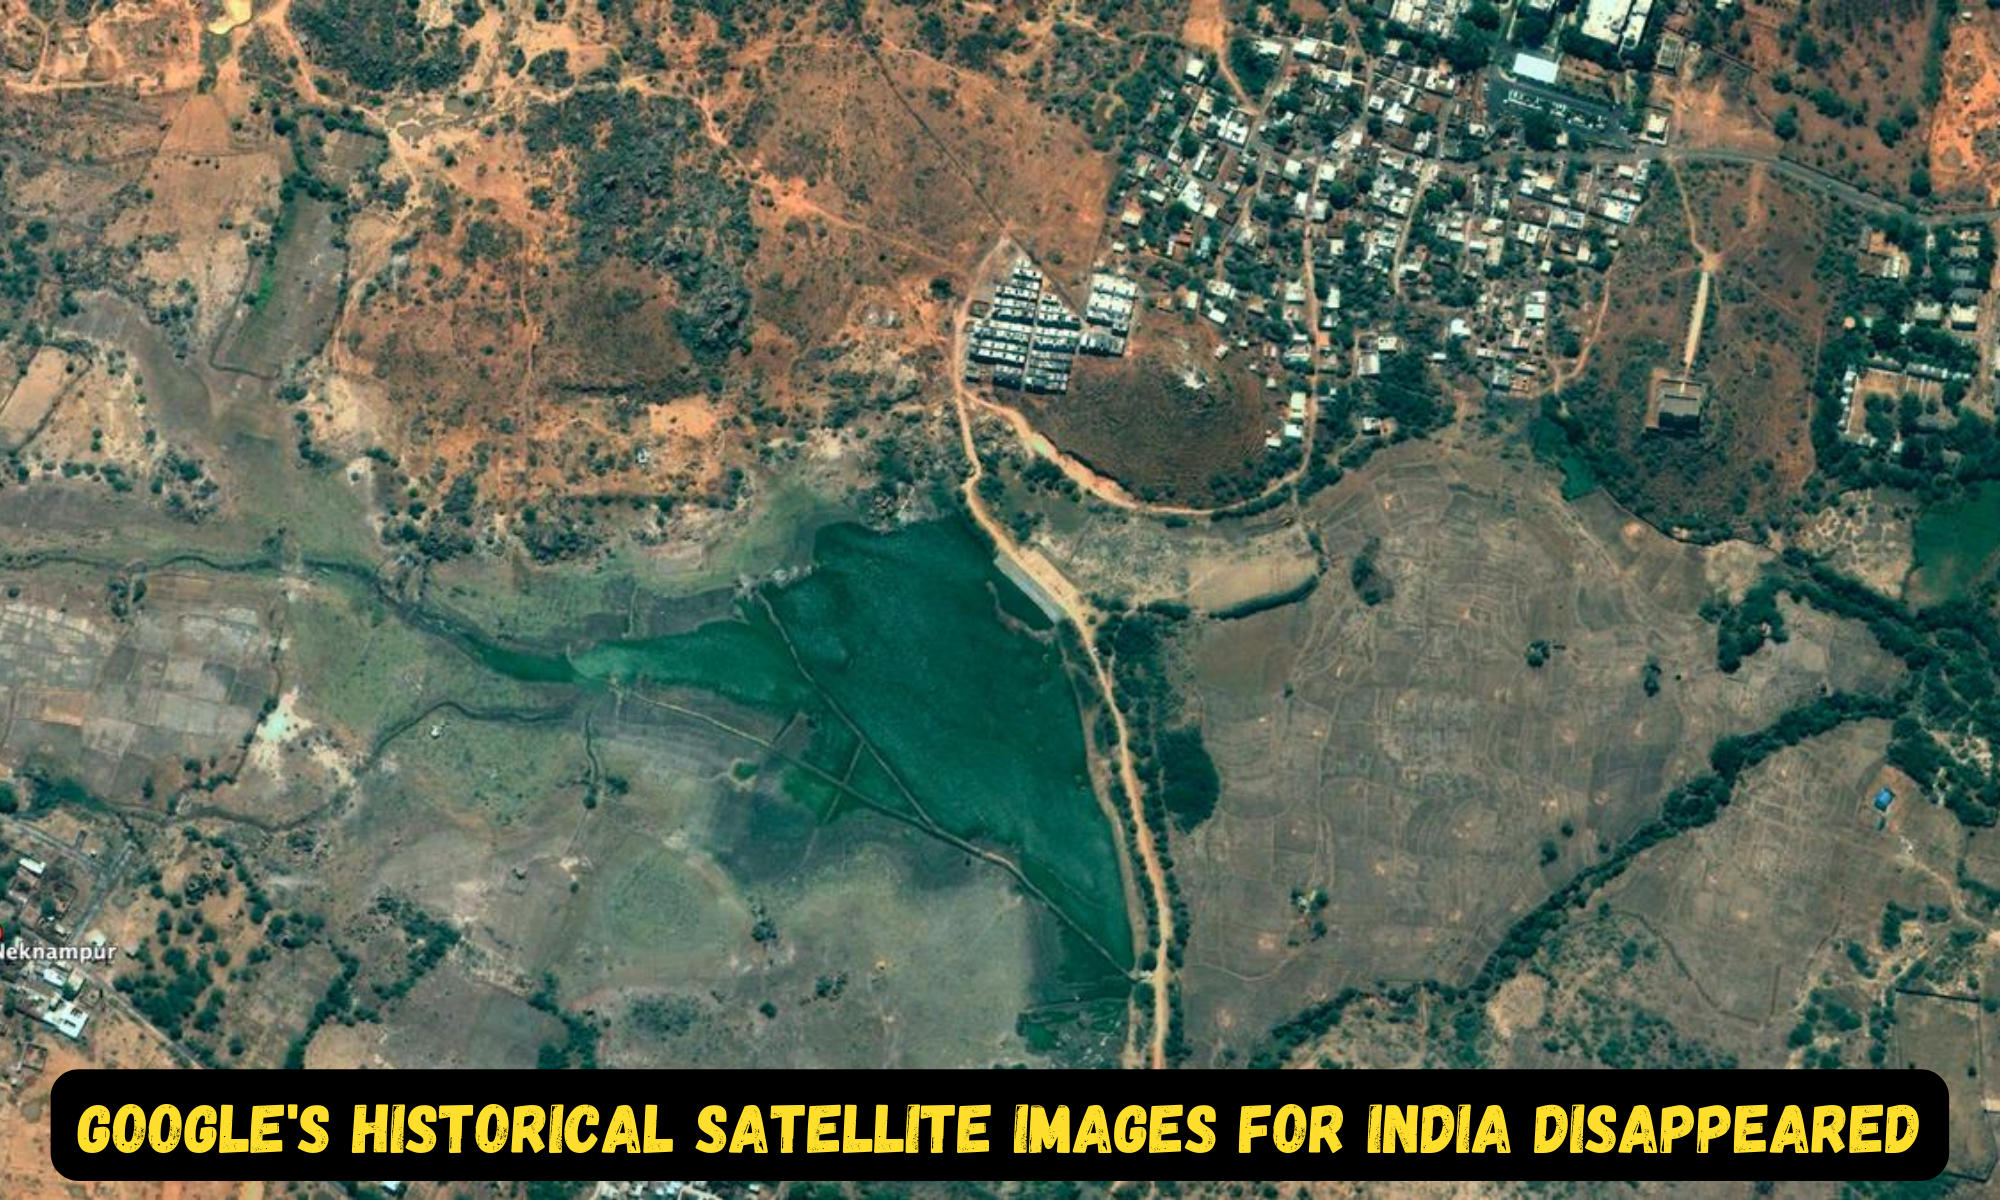 Google's historical satellite images for India disappeared